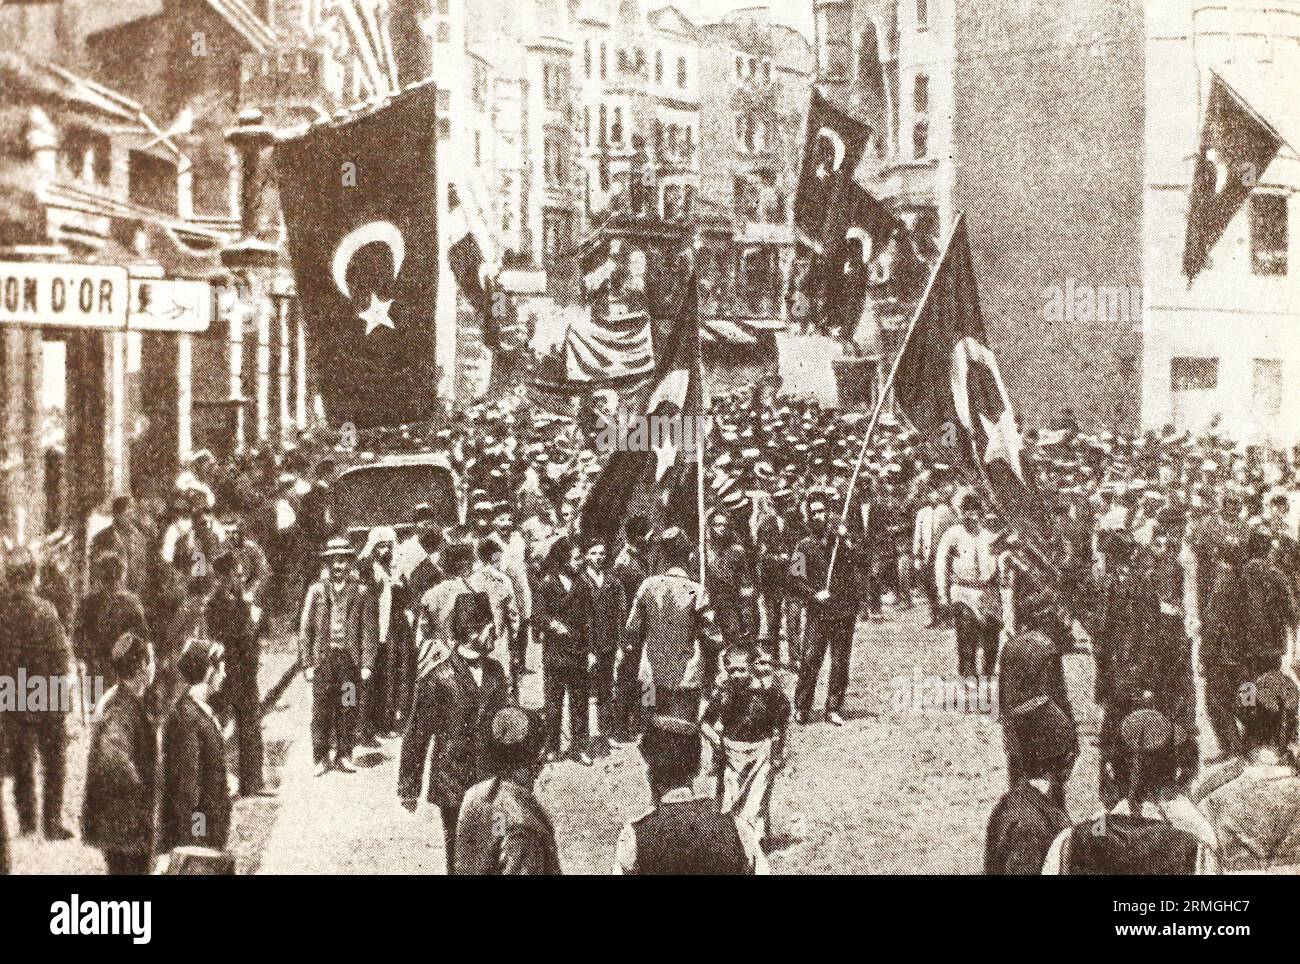 Demonstration in Istanbul in July 1908 on the occasion of the proclamation of the constitution. Photo taken in 1908. Stock Photo